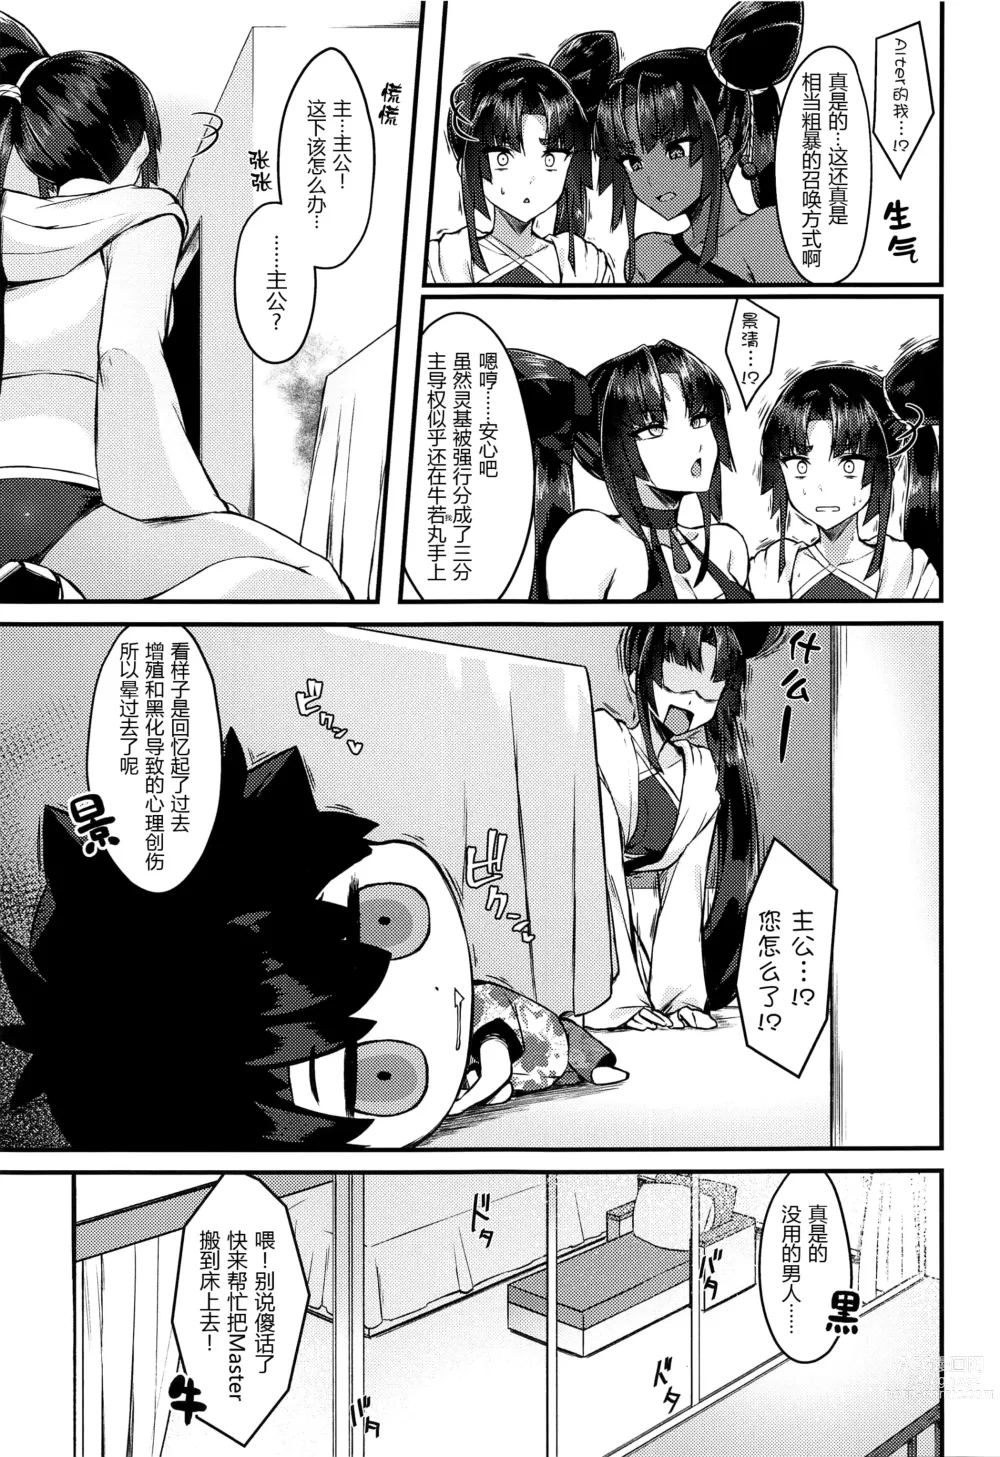 Page 5 of doujinshi Comparing the Ushis